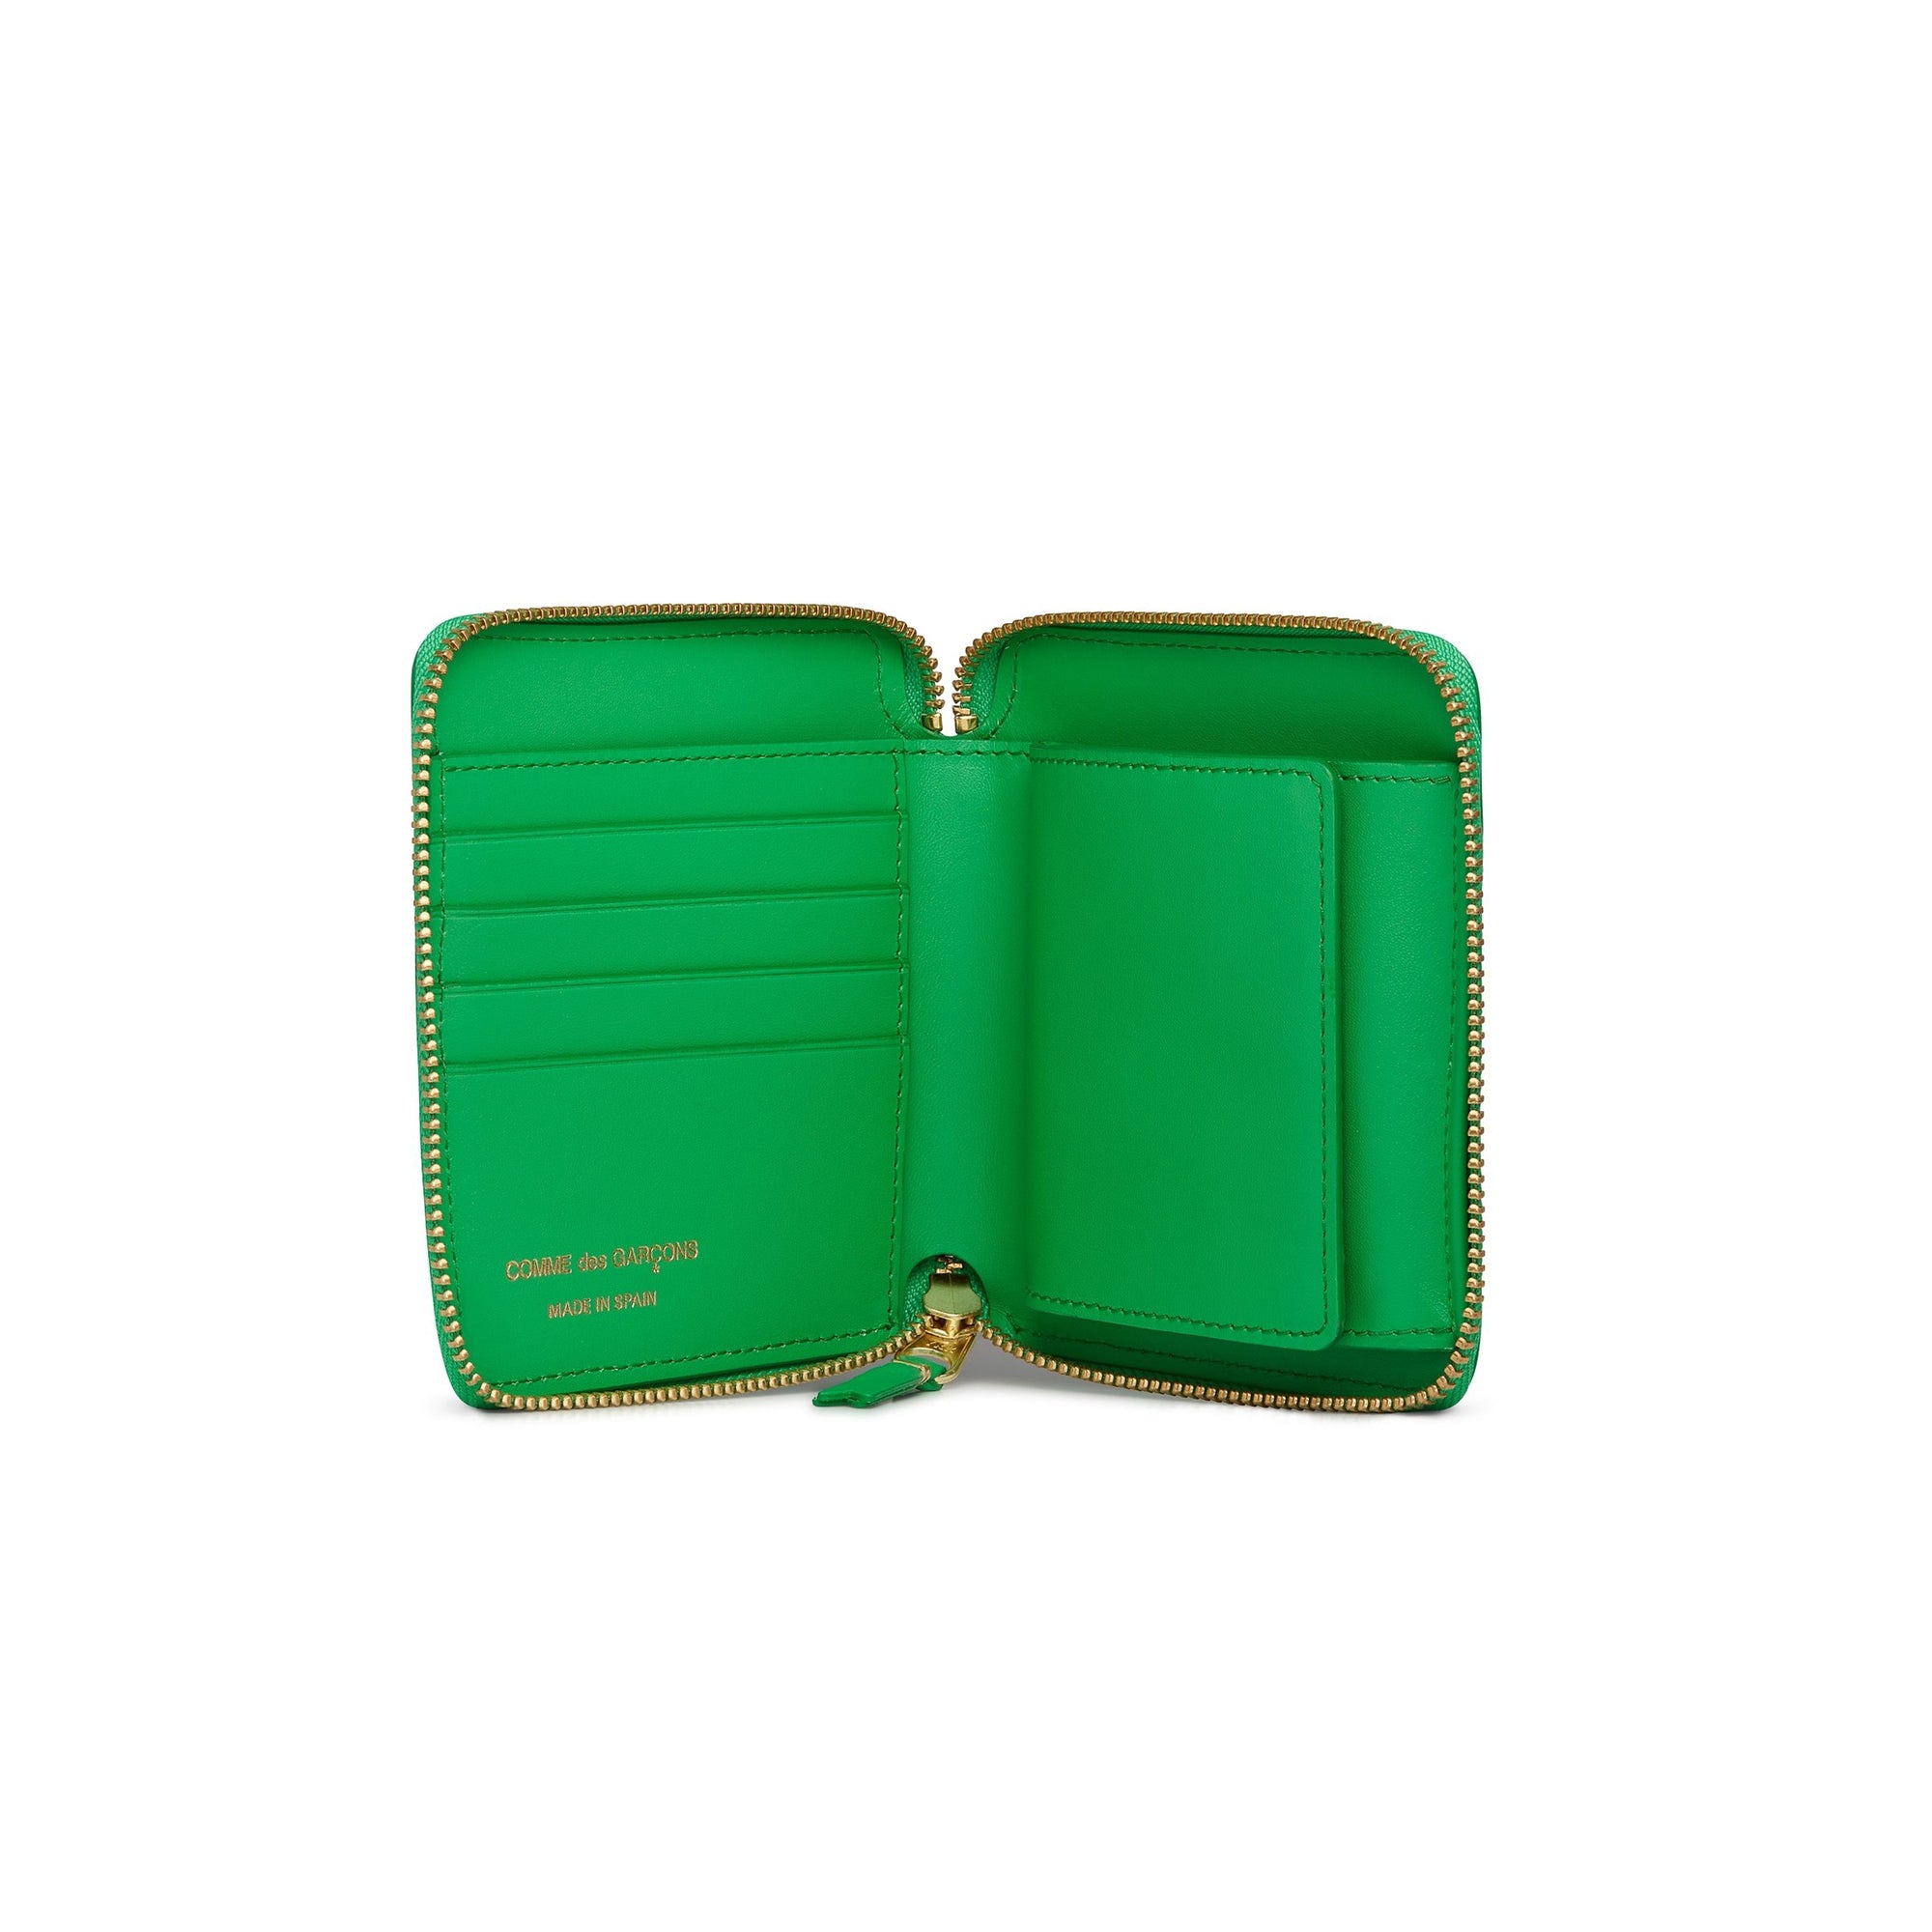 CDG WALLET - Colored Leather - (SA2100 Green) view 2